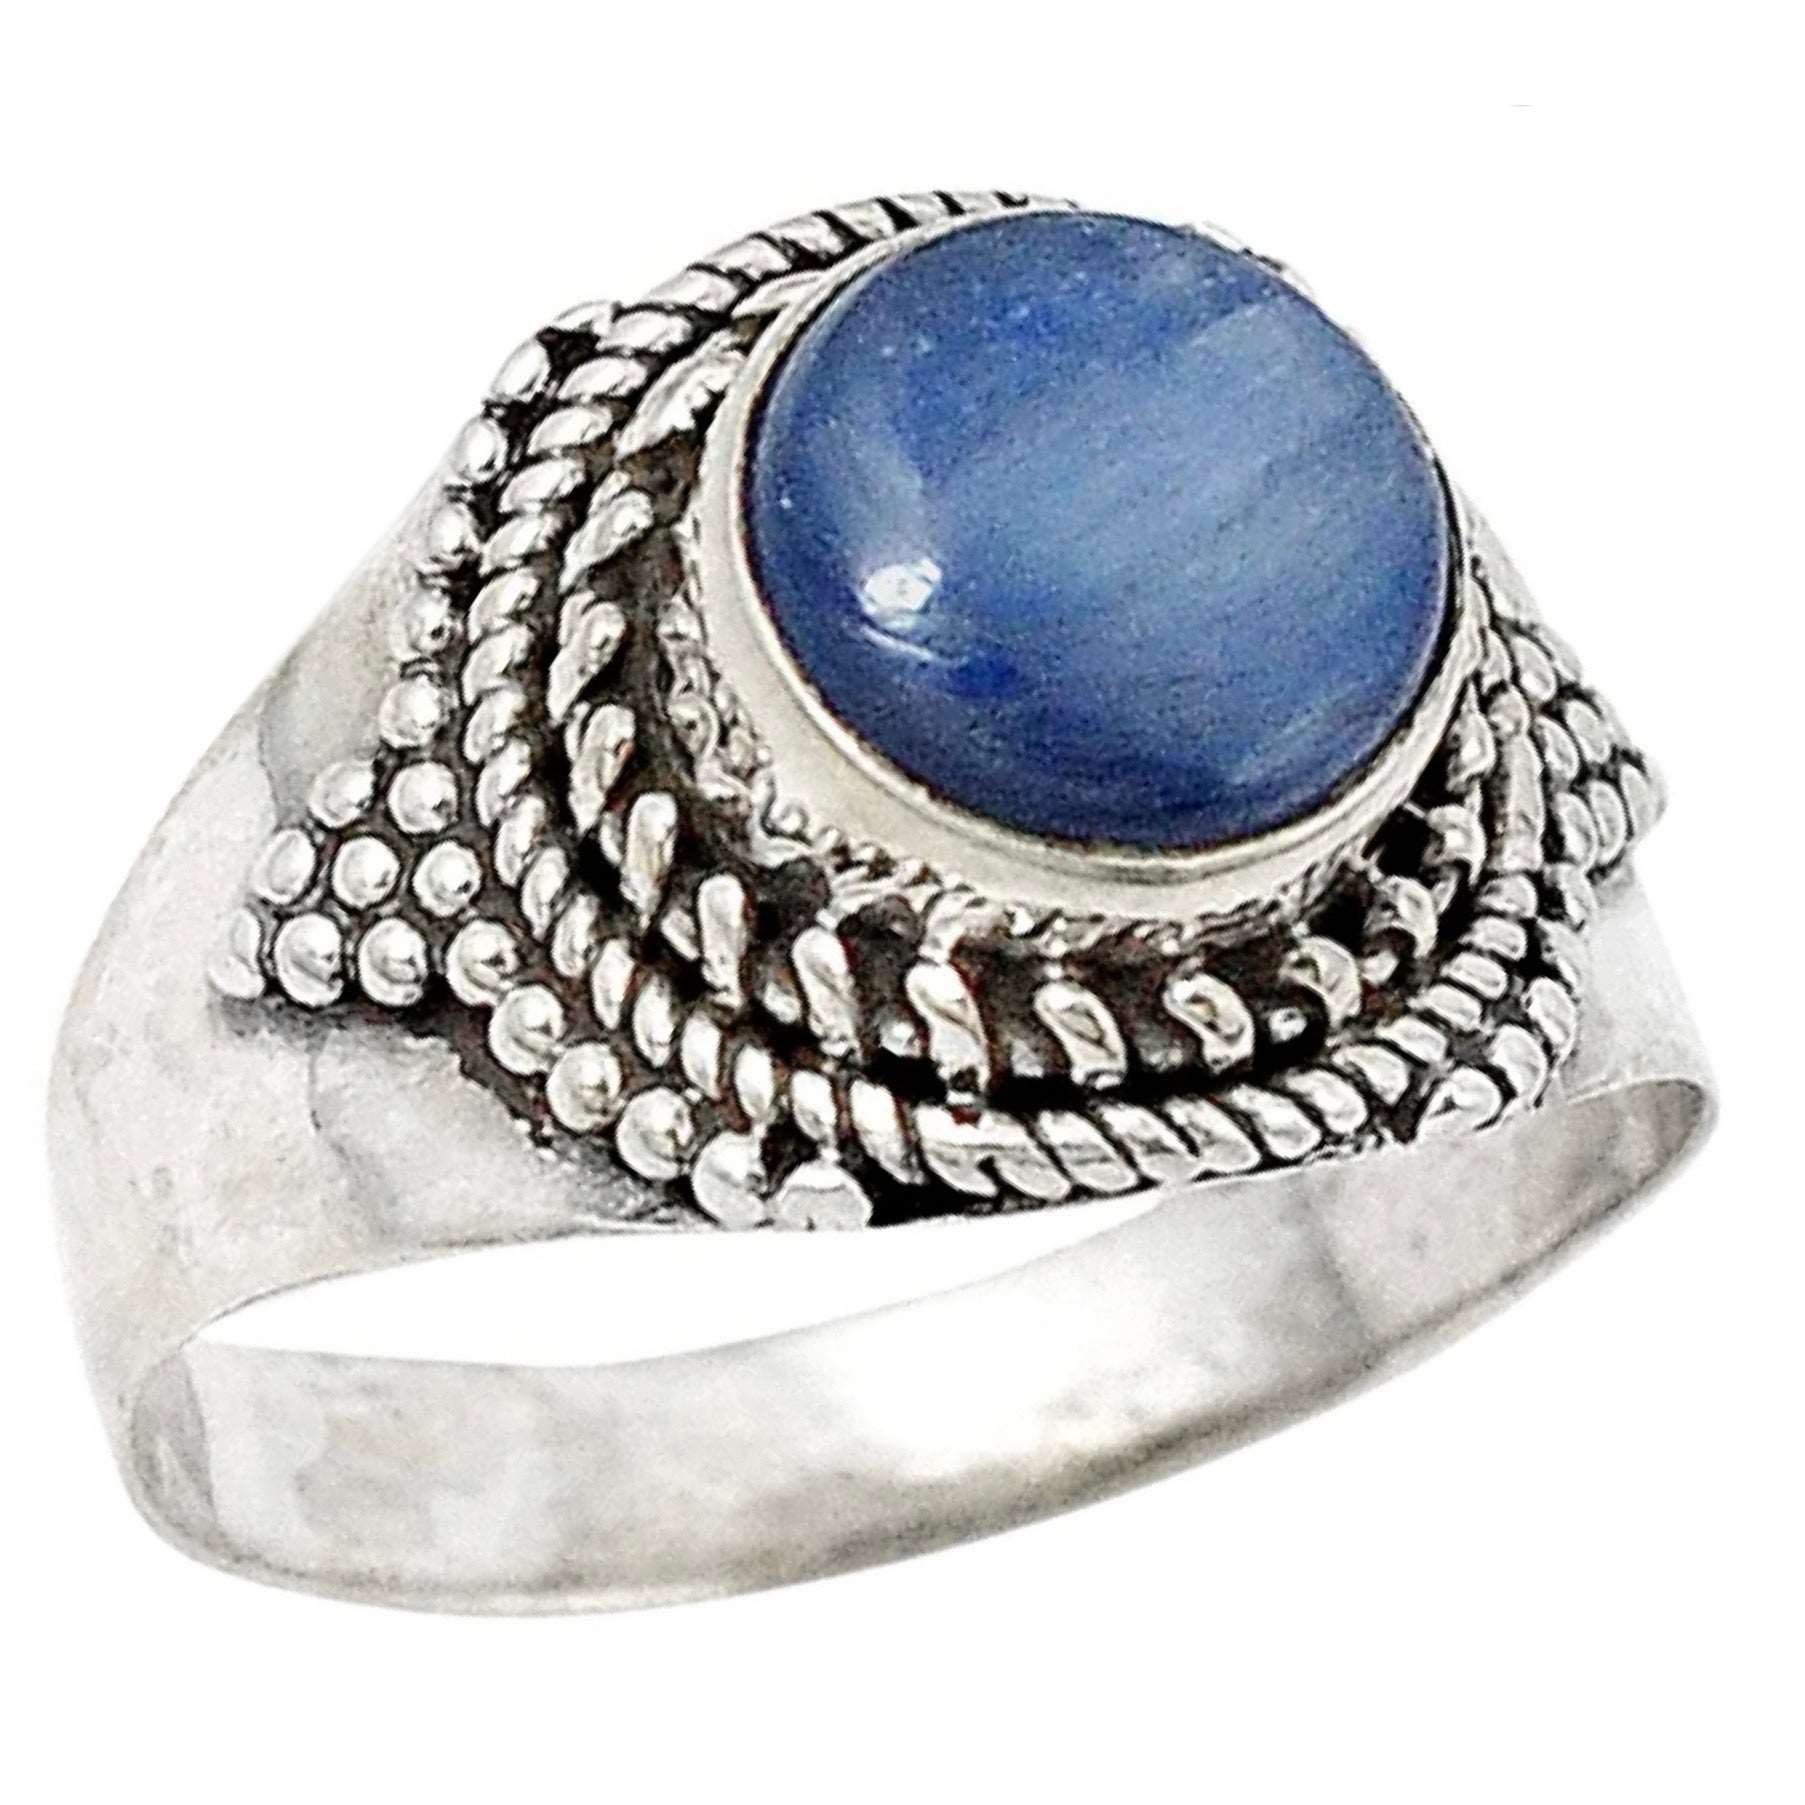 3.31 cts Natural Blue Kyanite Gemstone Solid .925 Sterling Silver Ring Size US 7 UK P